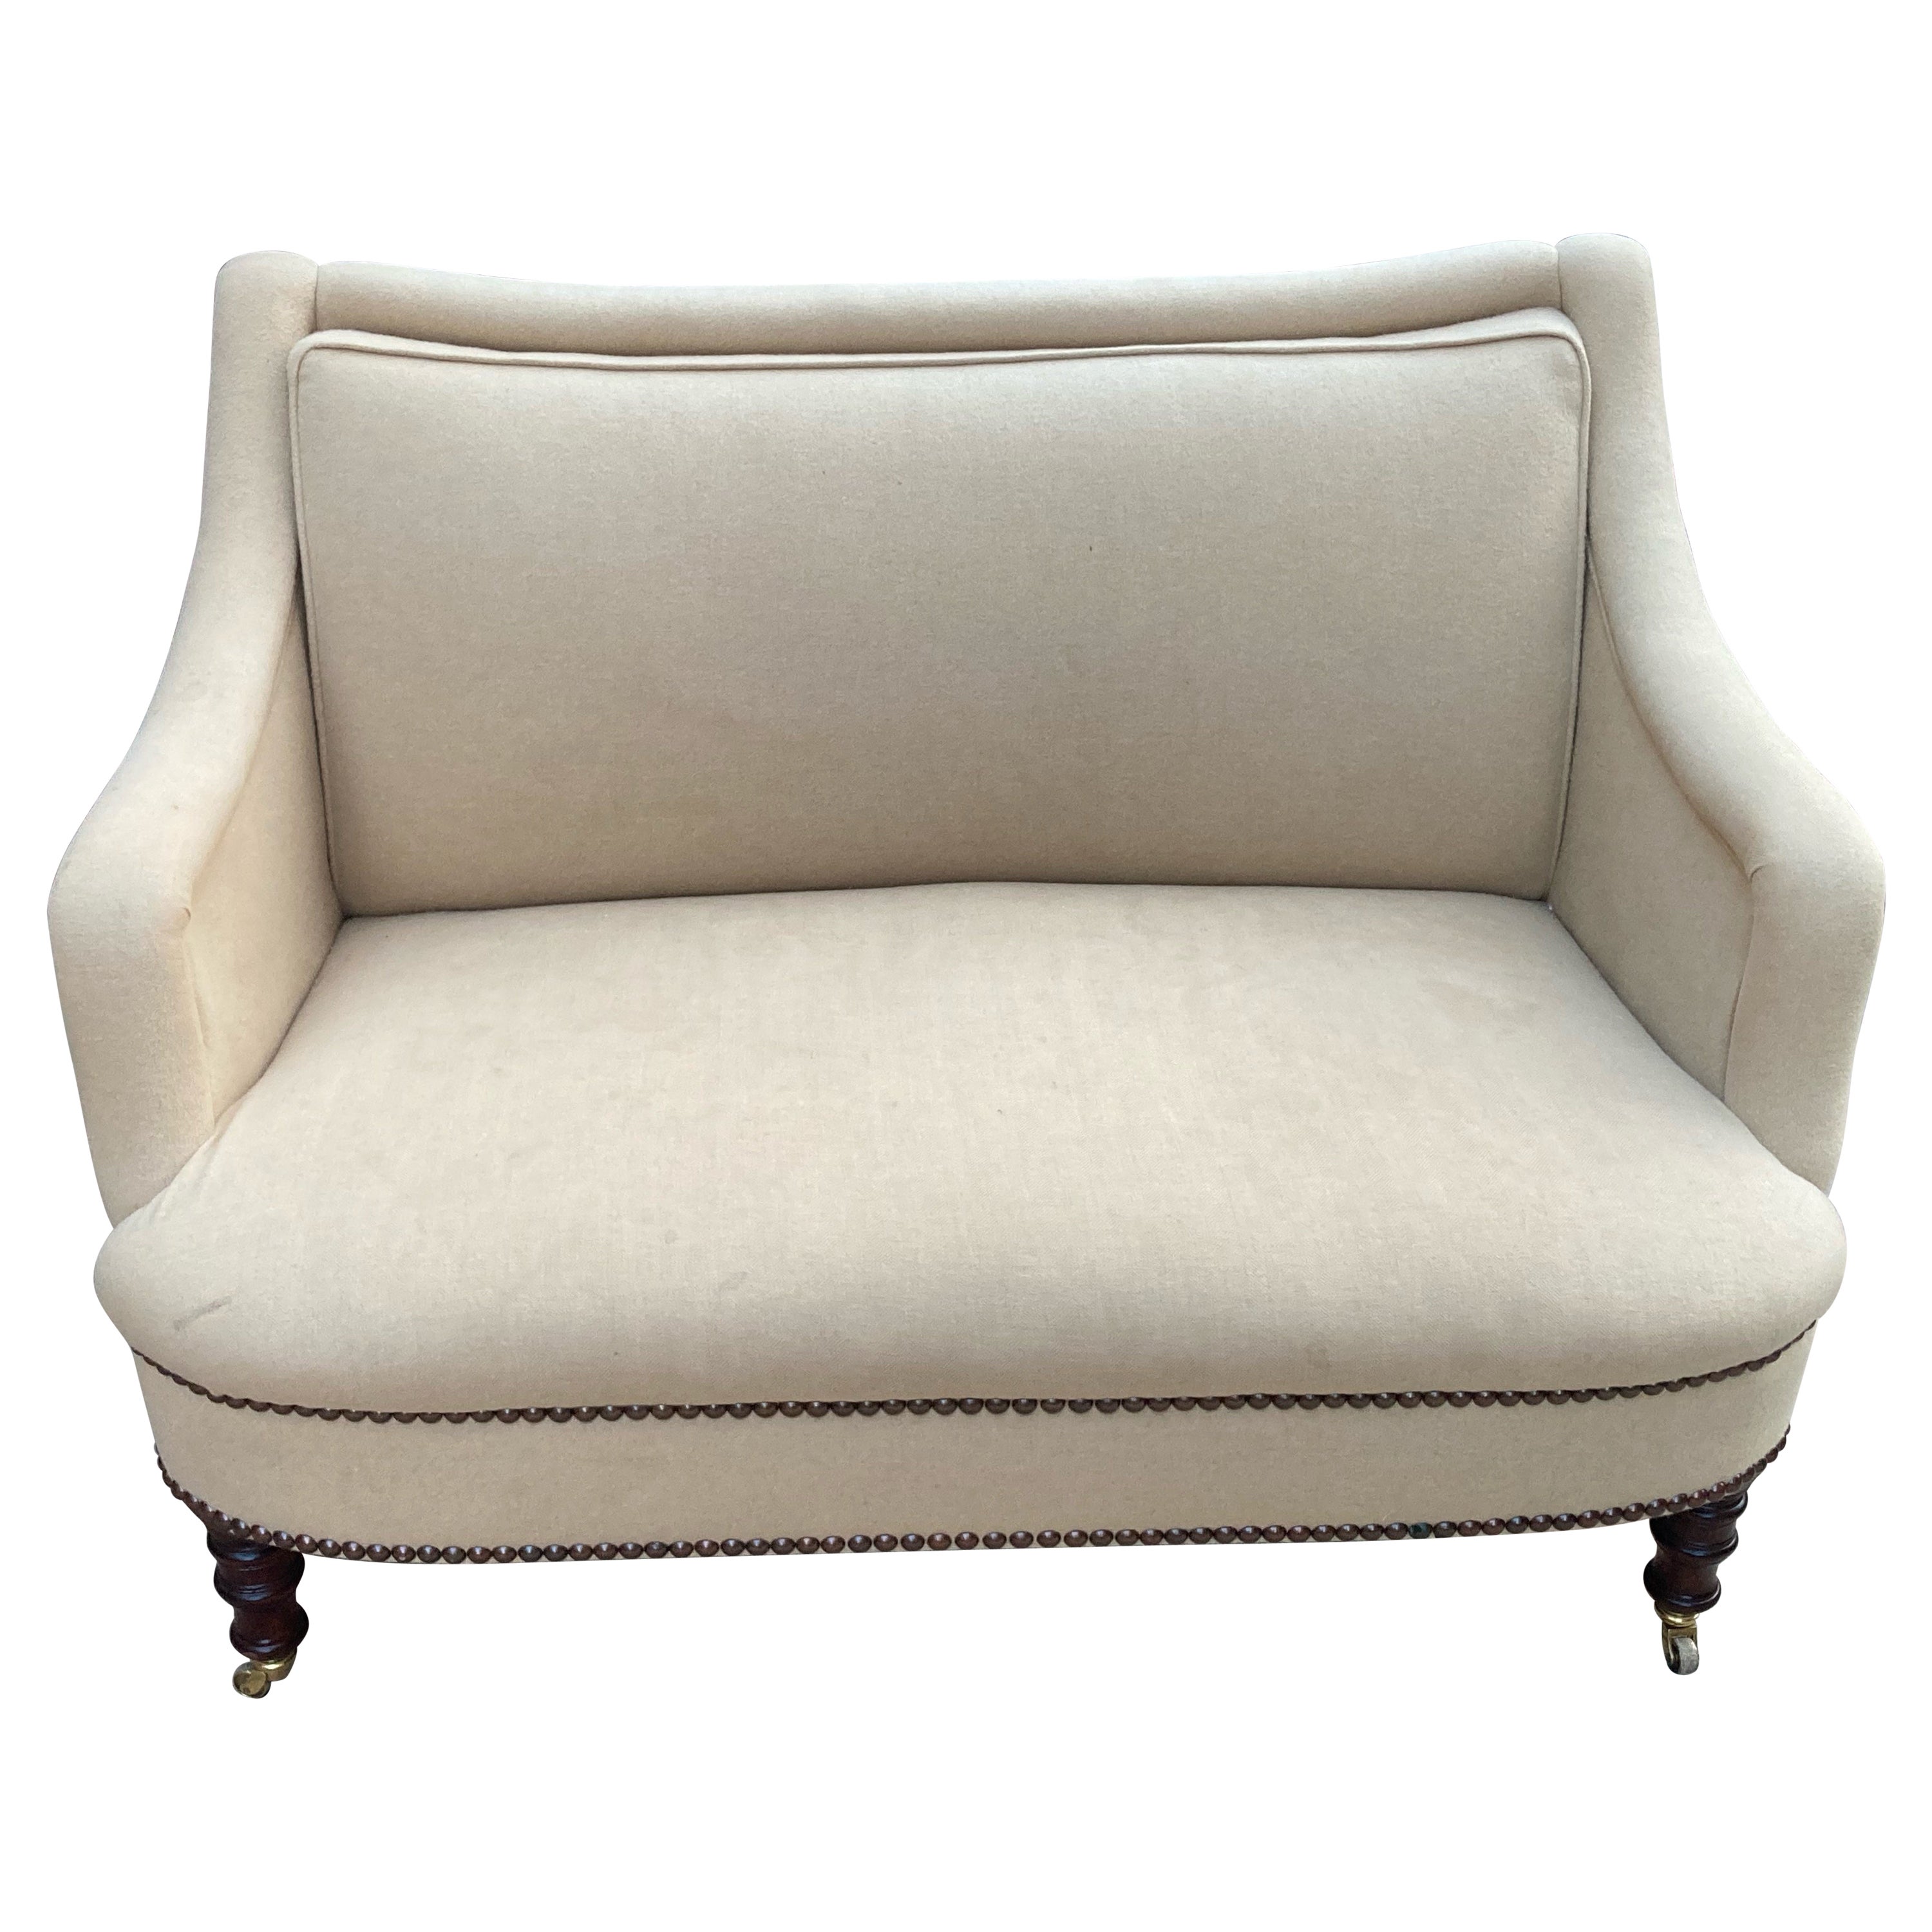 Classic George Smith Petite Fairhill Upholstered Settee Loveseat 